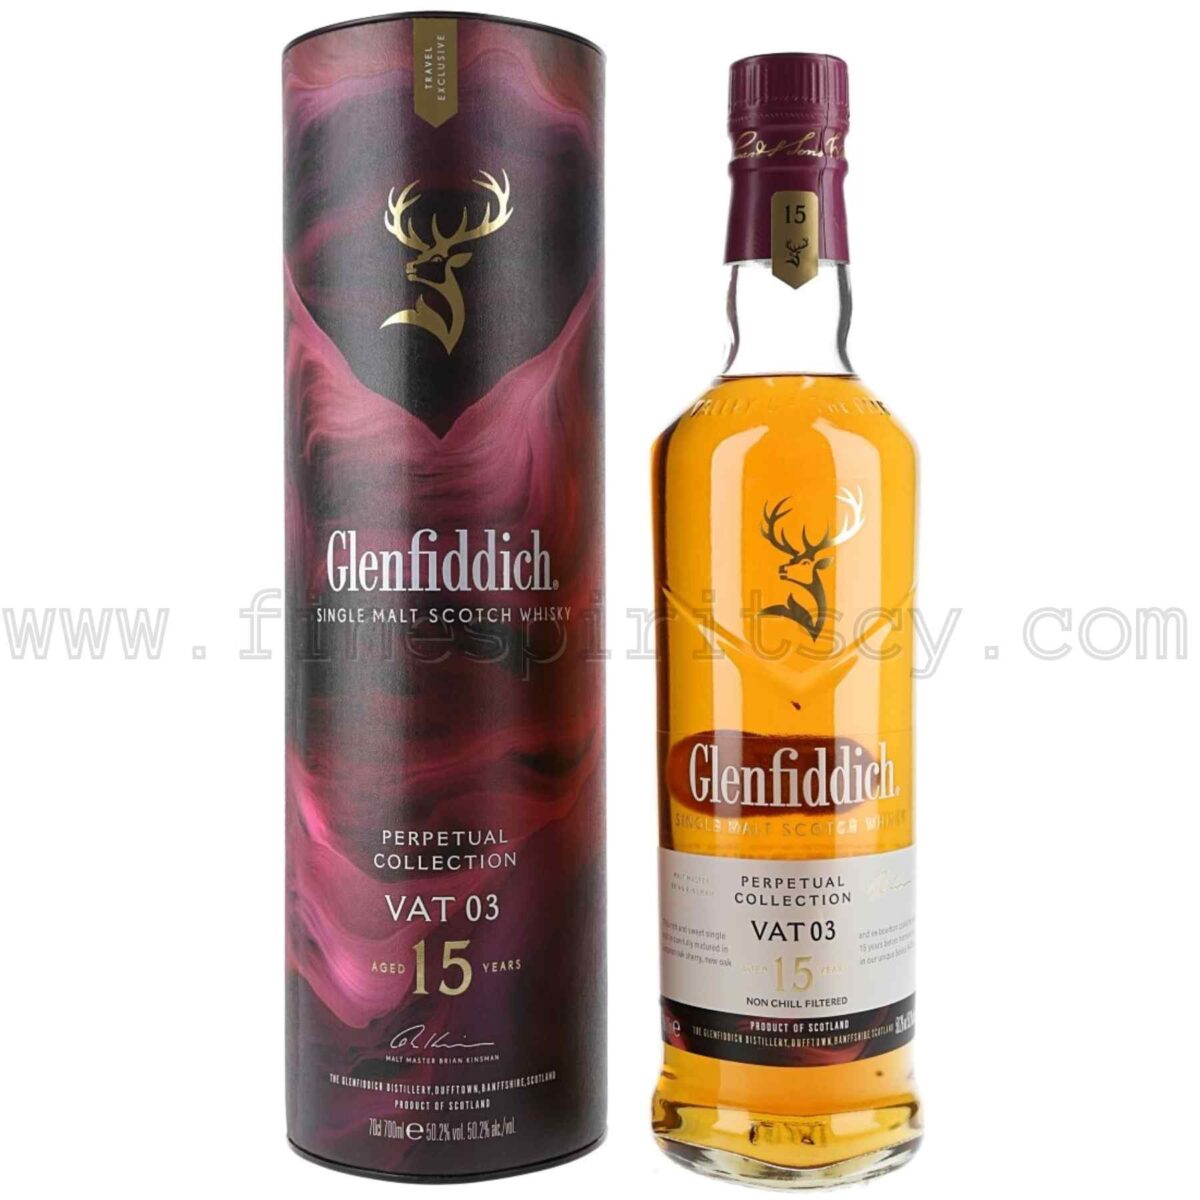 Glenfiddich Perpetual Collection VAT 03